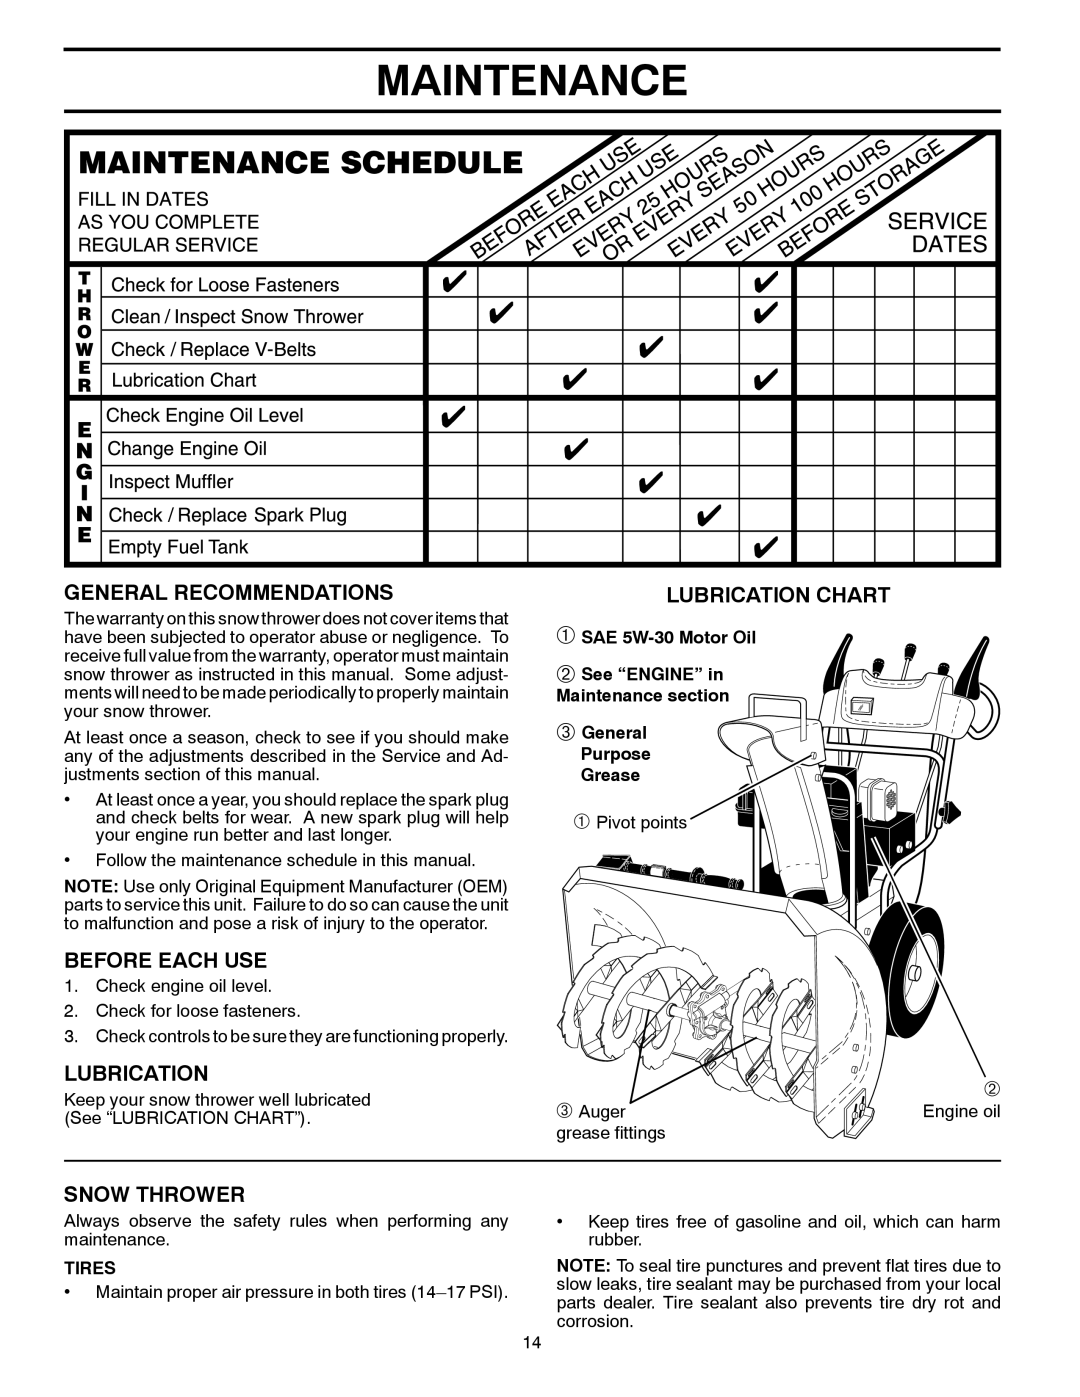 Poulan PP265E27 Maintenance, General Recommendations, Before Each Use, Lubrication Chart, Snow Thrower, Purpose Grease 